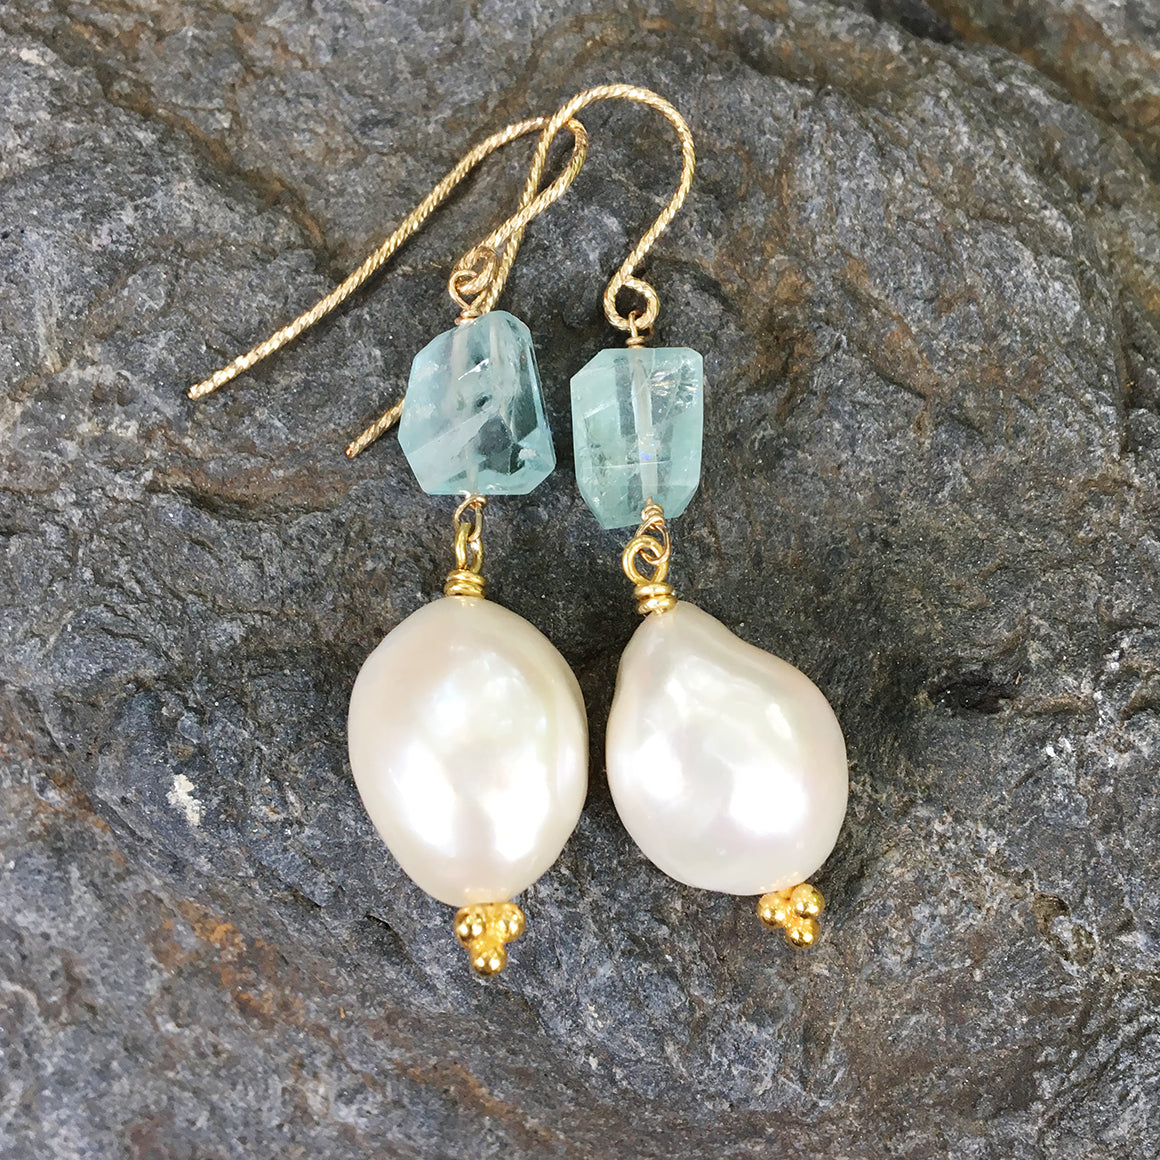 Aqua Marine Faceted Nugget with Large Baroque Pearl Earrings